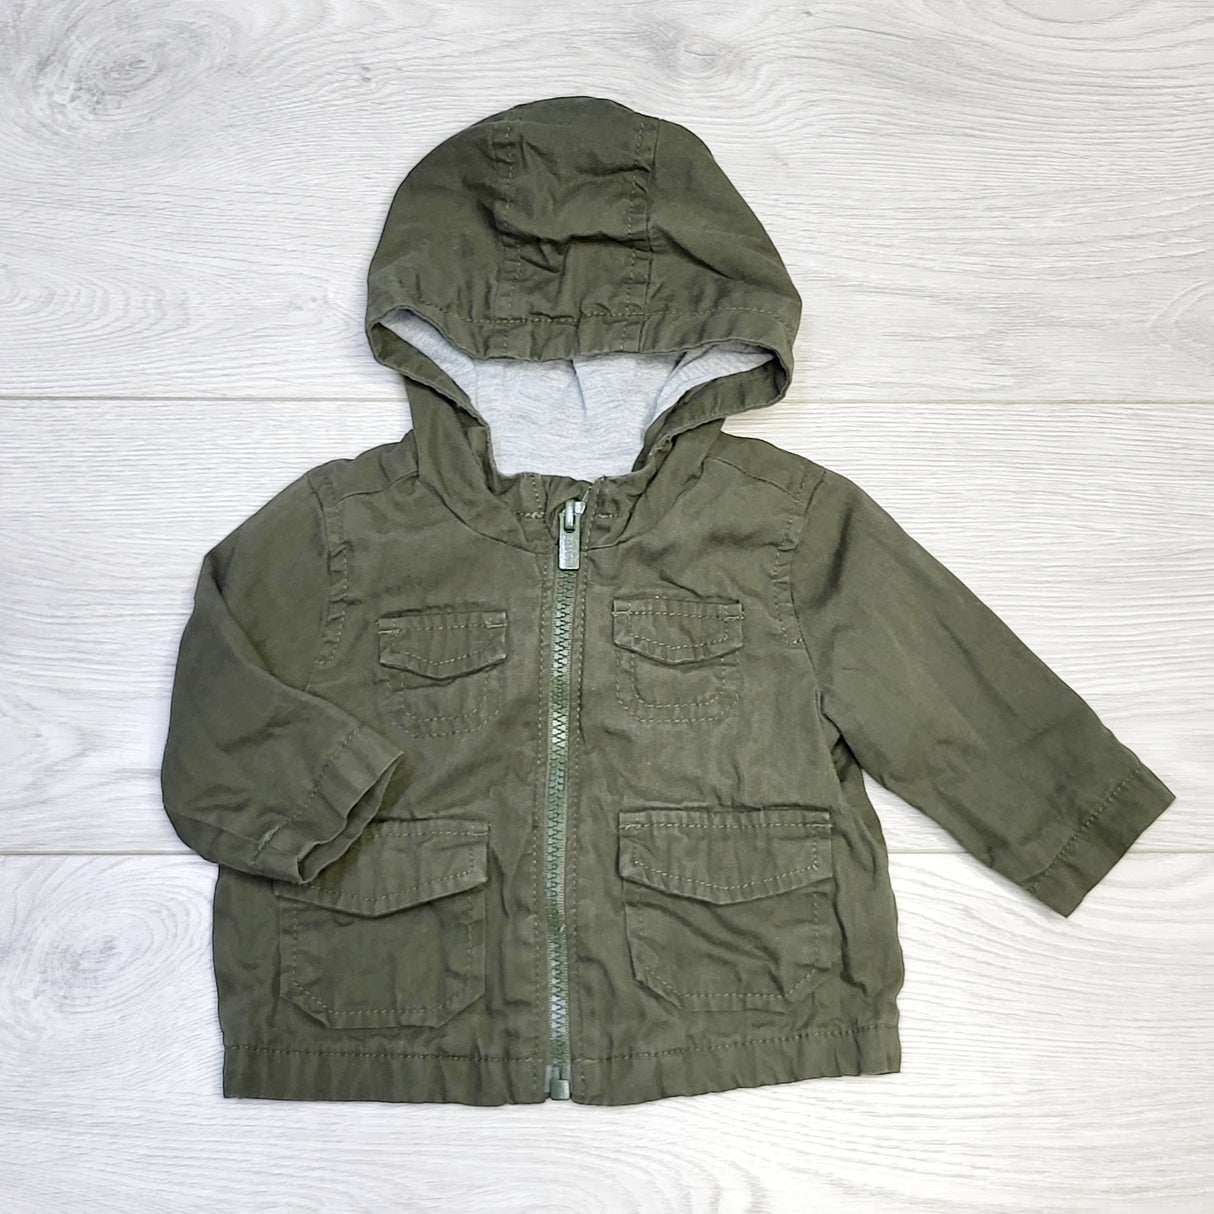 COWN1 - Old Navy green hooded canvas jacket. Size 0-3 months